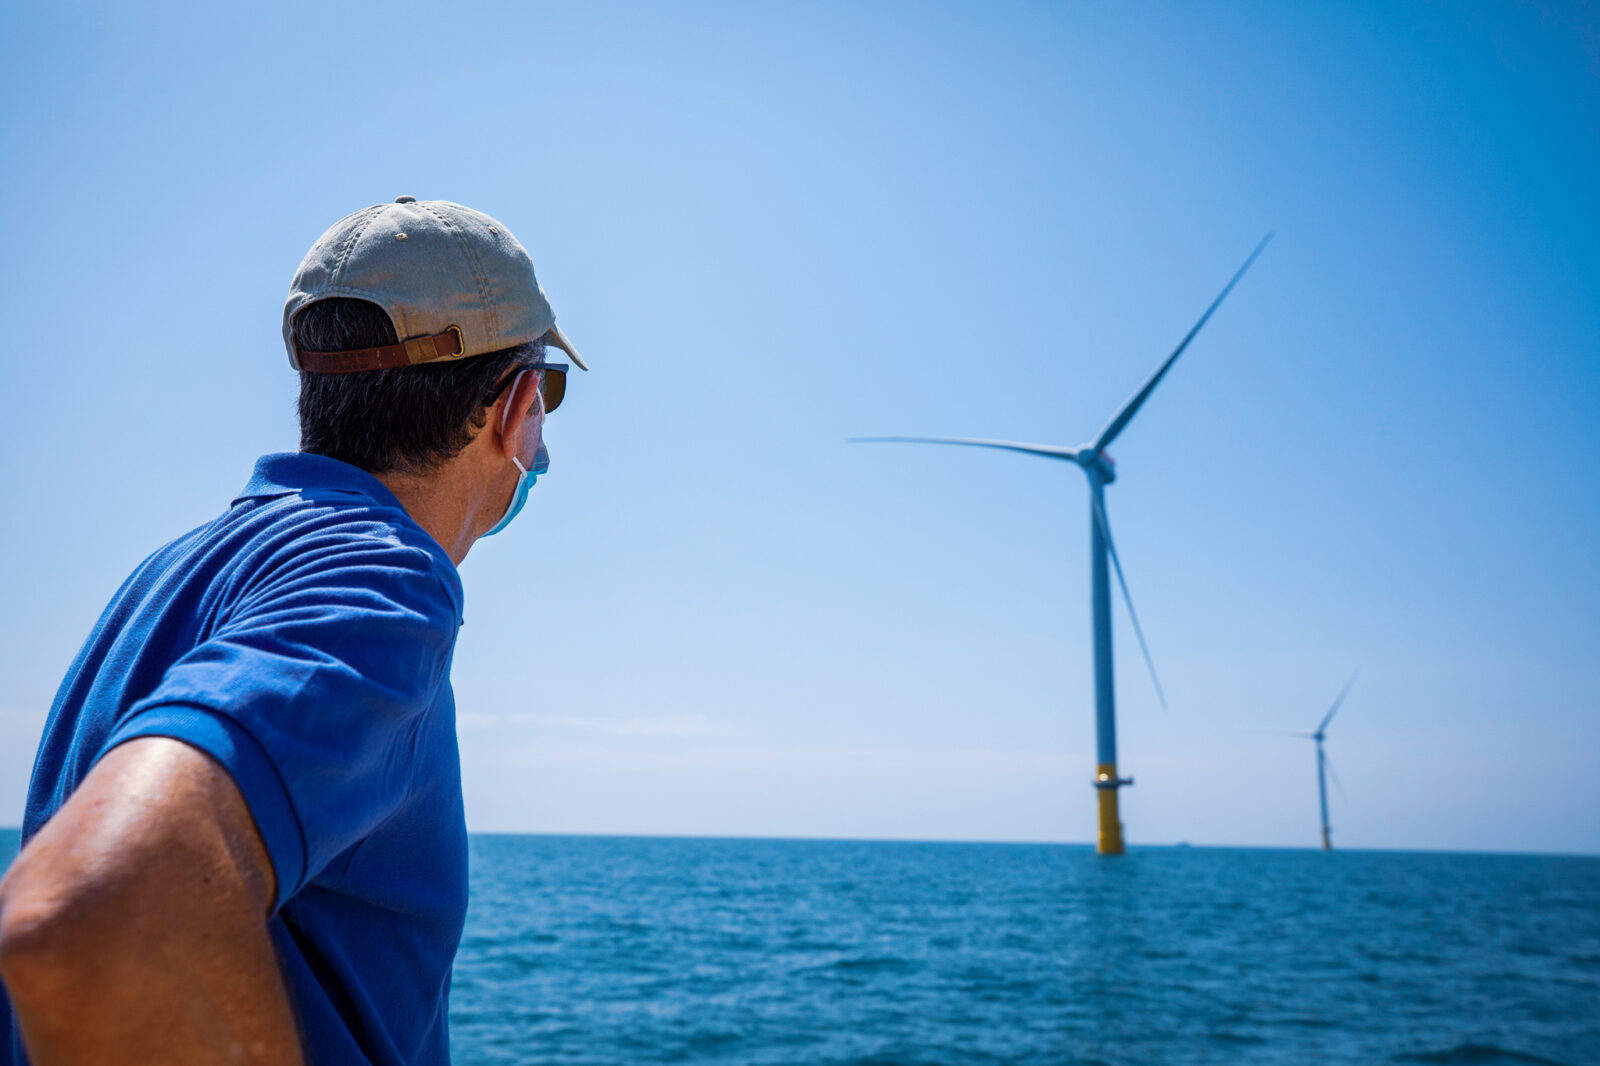 Man with mask and hat on looks out into body of water at wind farm